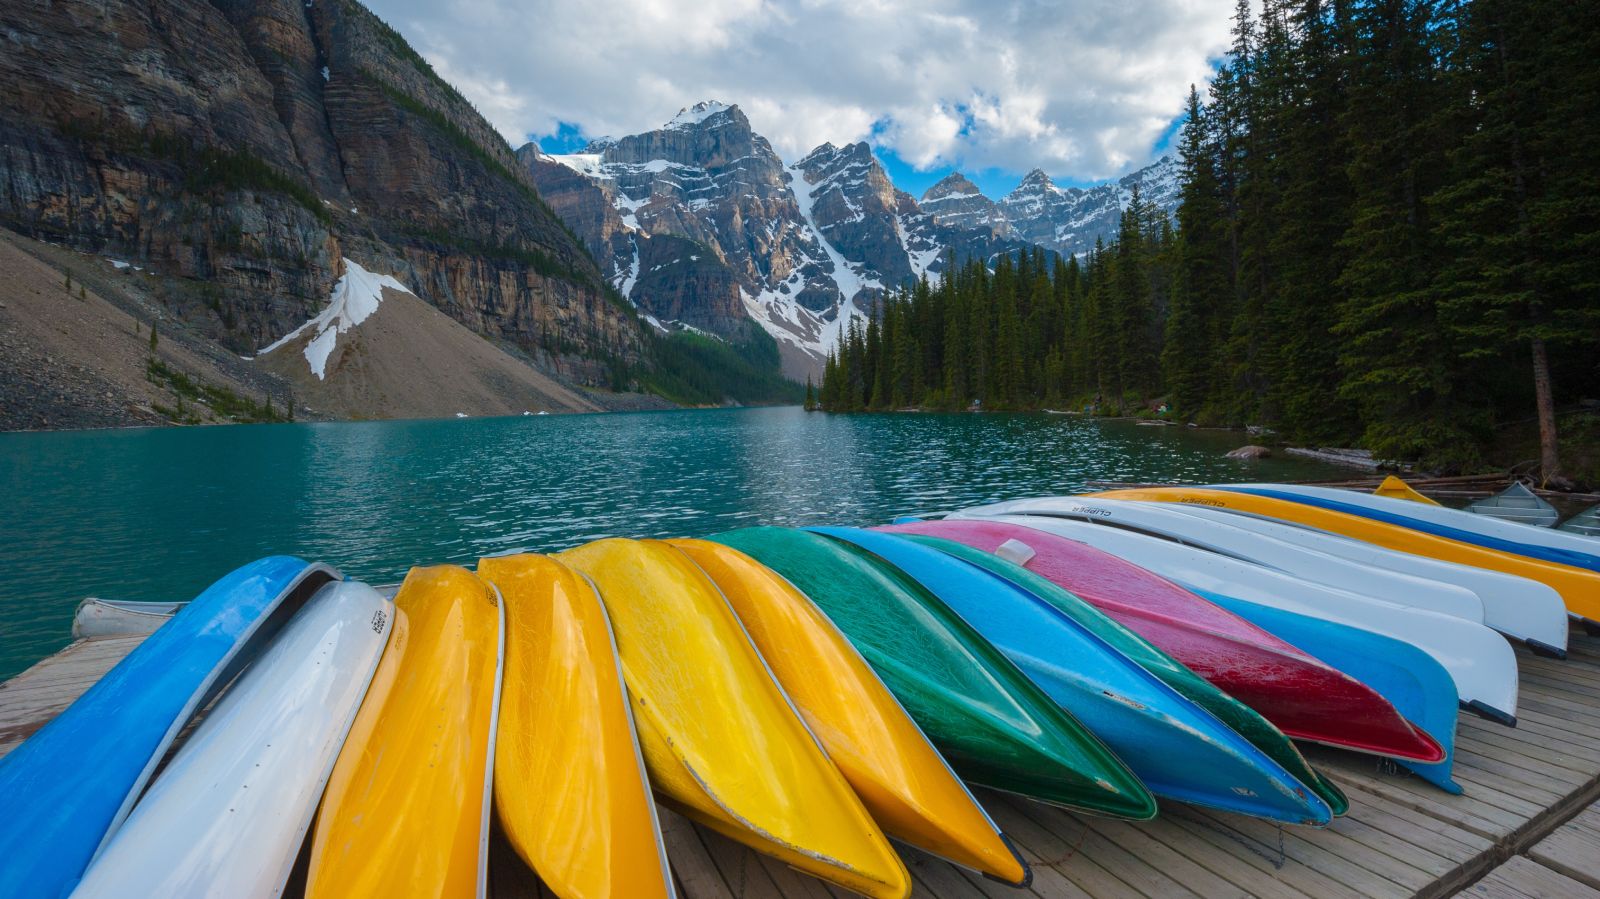 Canoes on a dock in front of a lake and mountains.